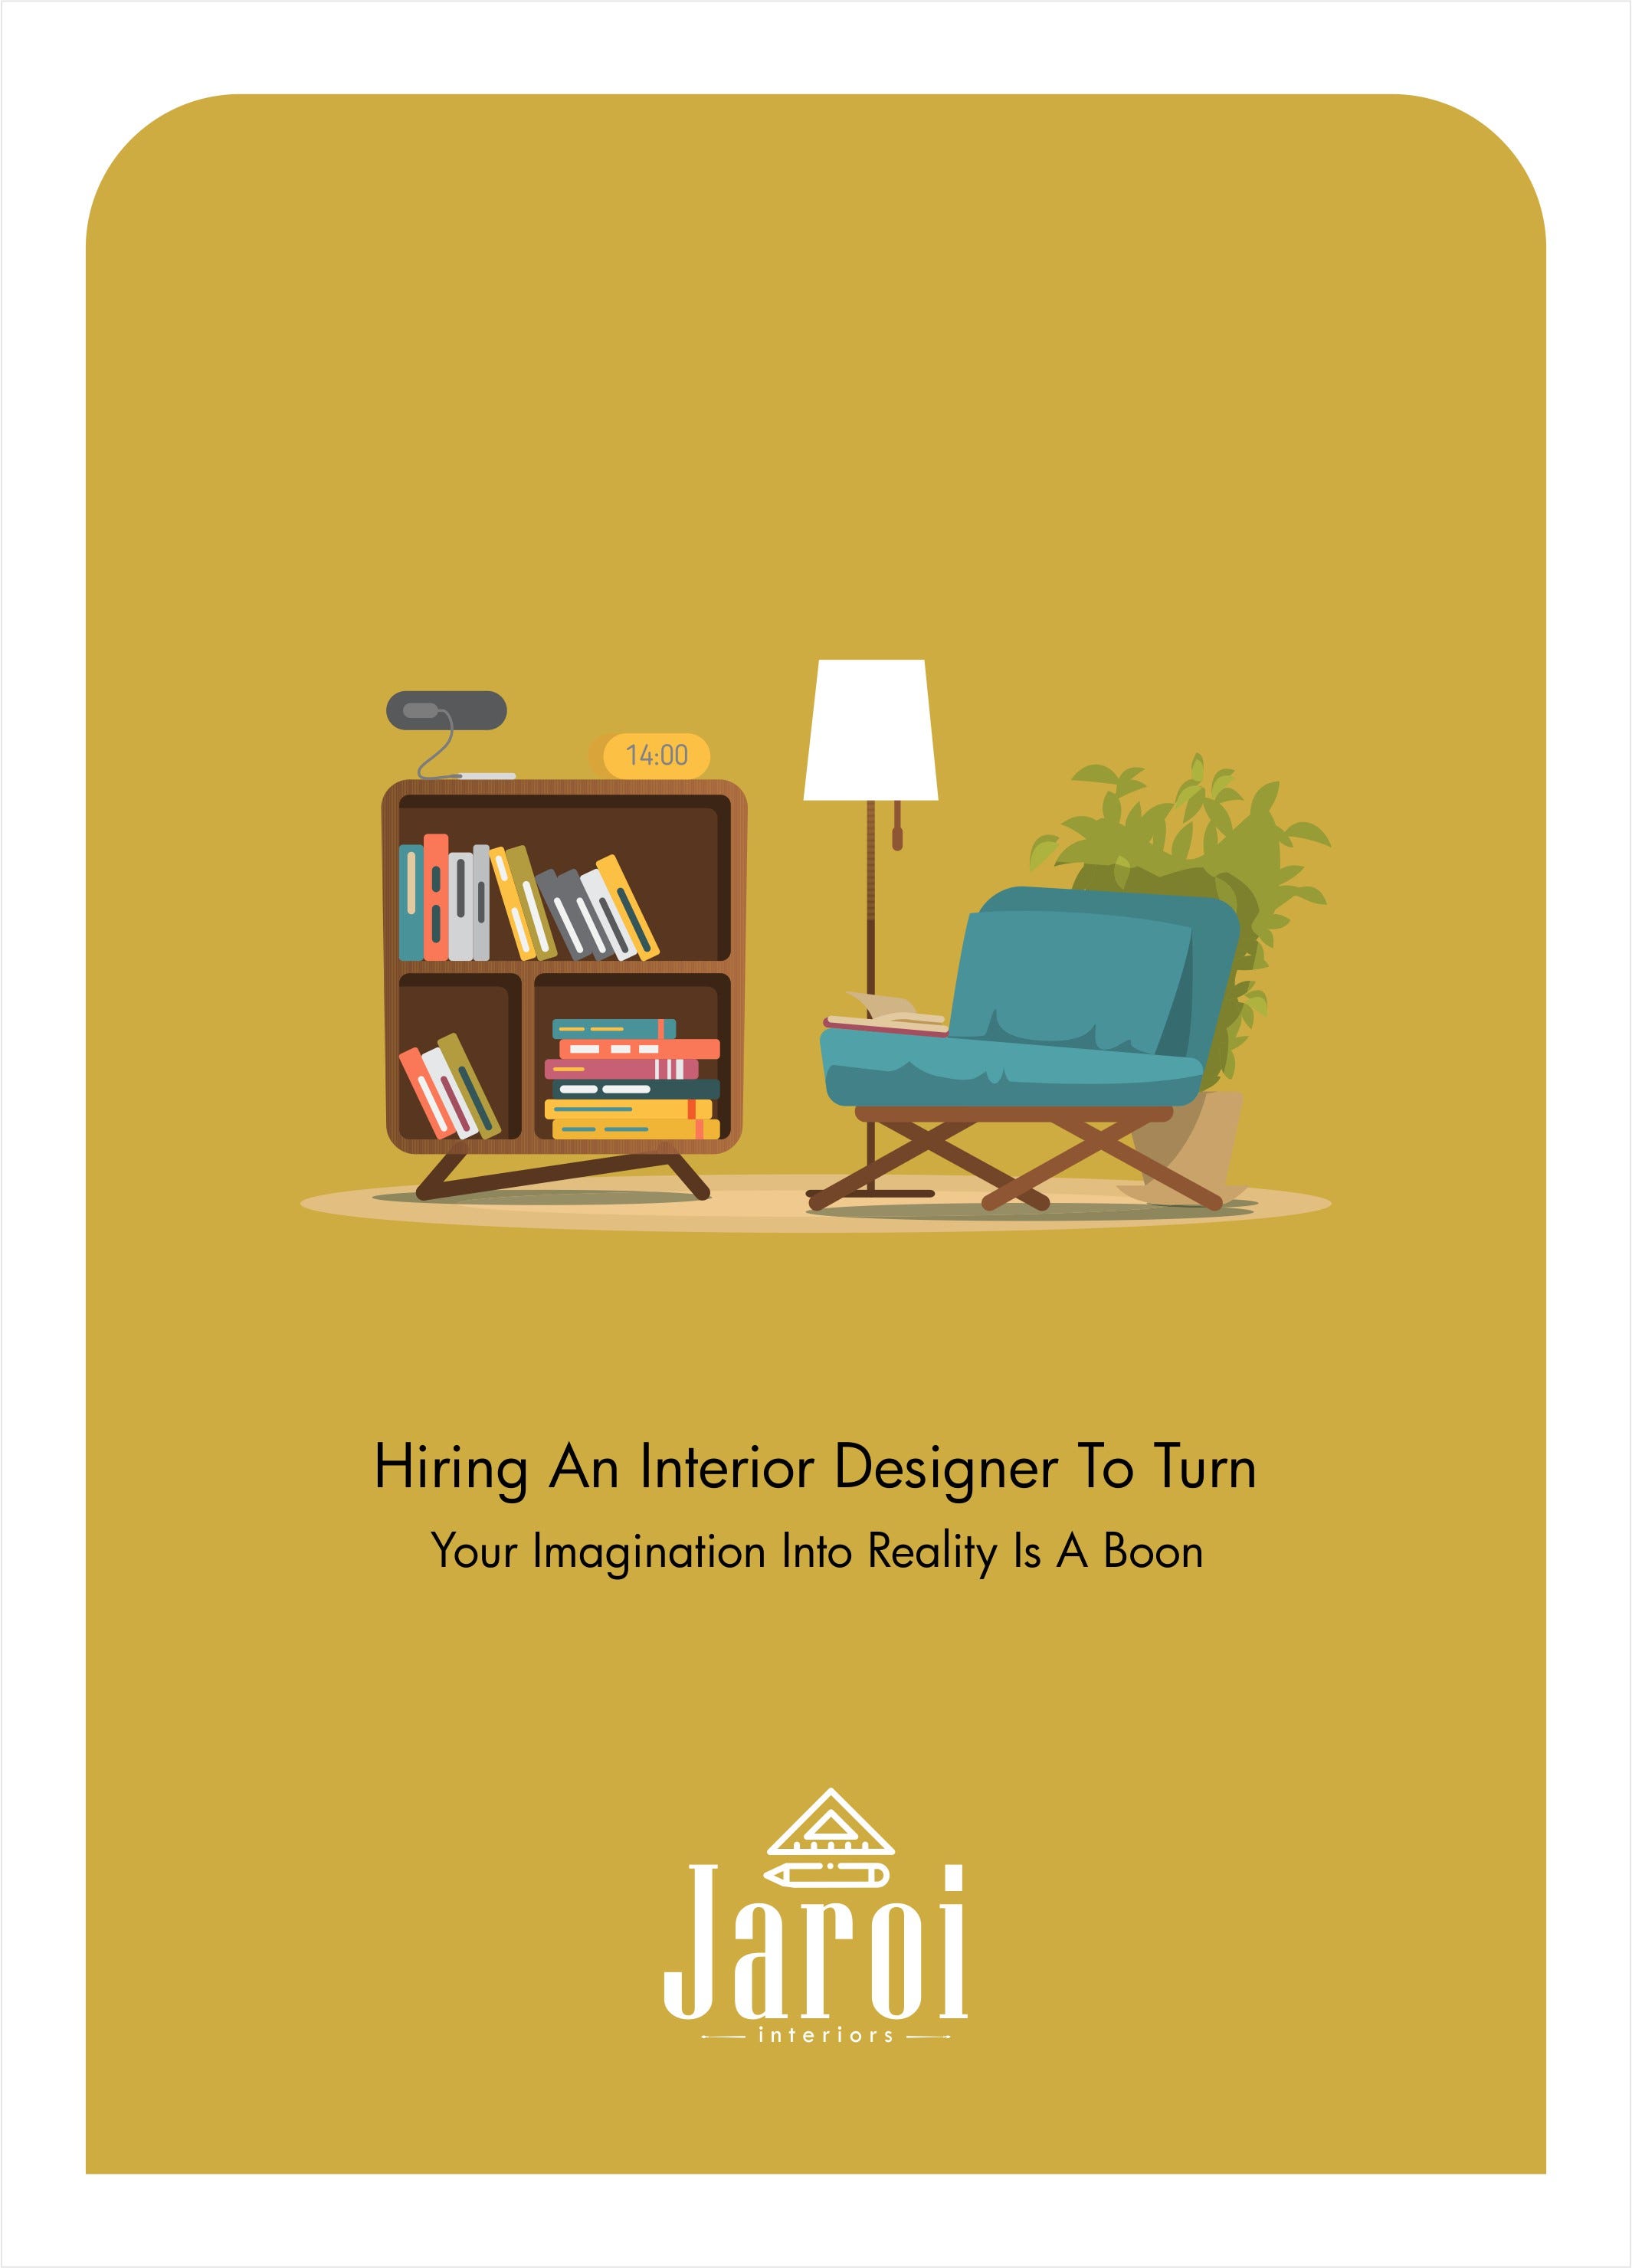 Hiring An Interior Designer To Turn Your Imagination Into